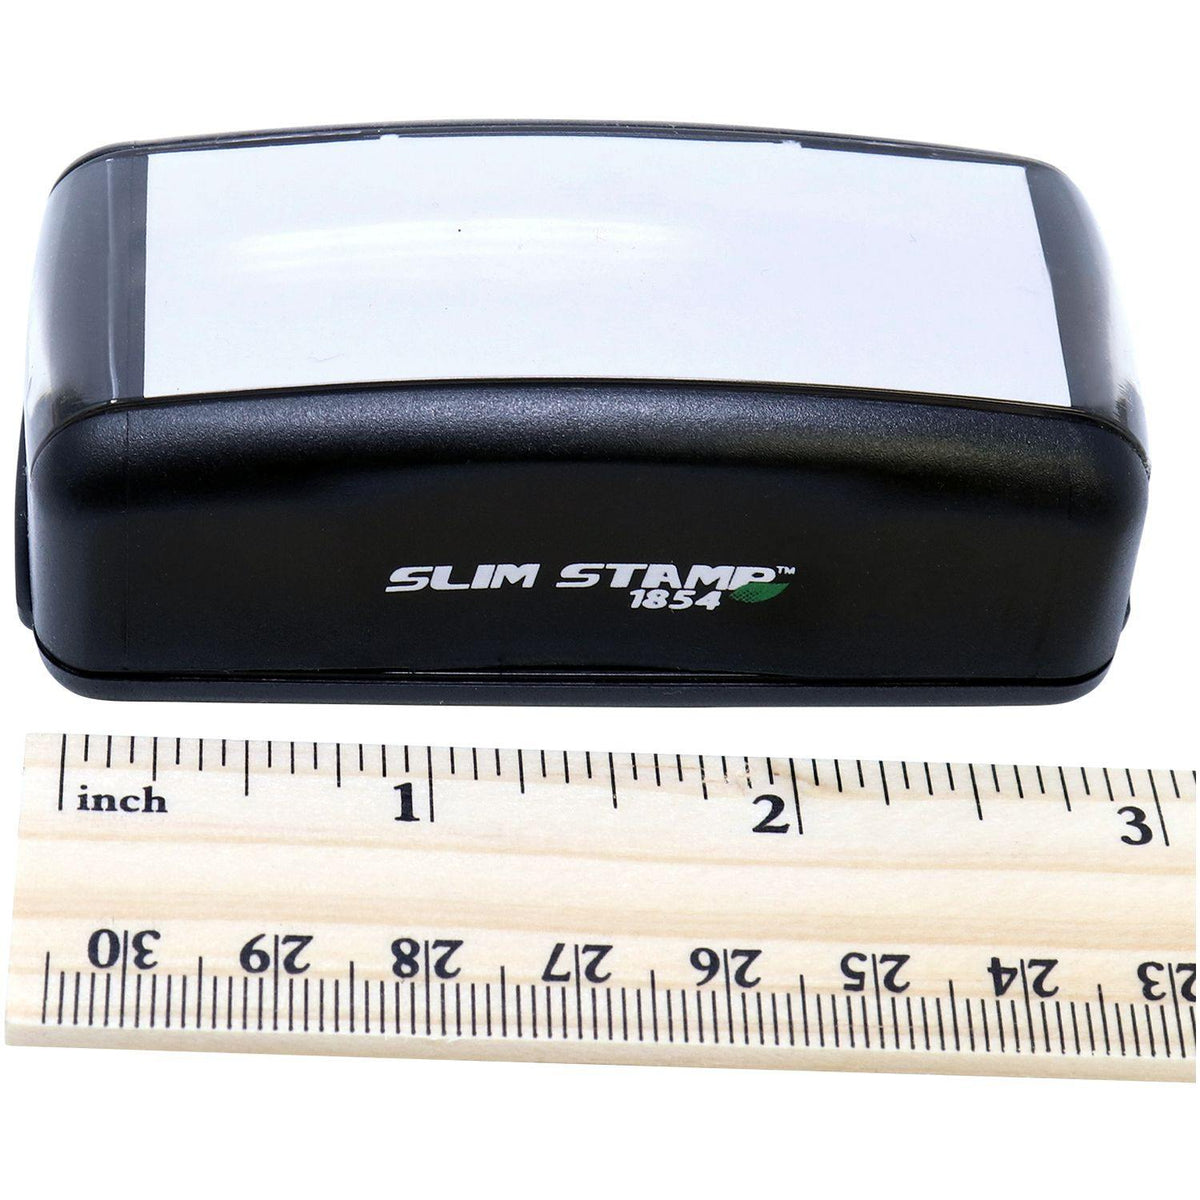 Measurement Large Pre-Inked Media Mail Stamp with Ruler